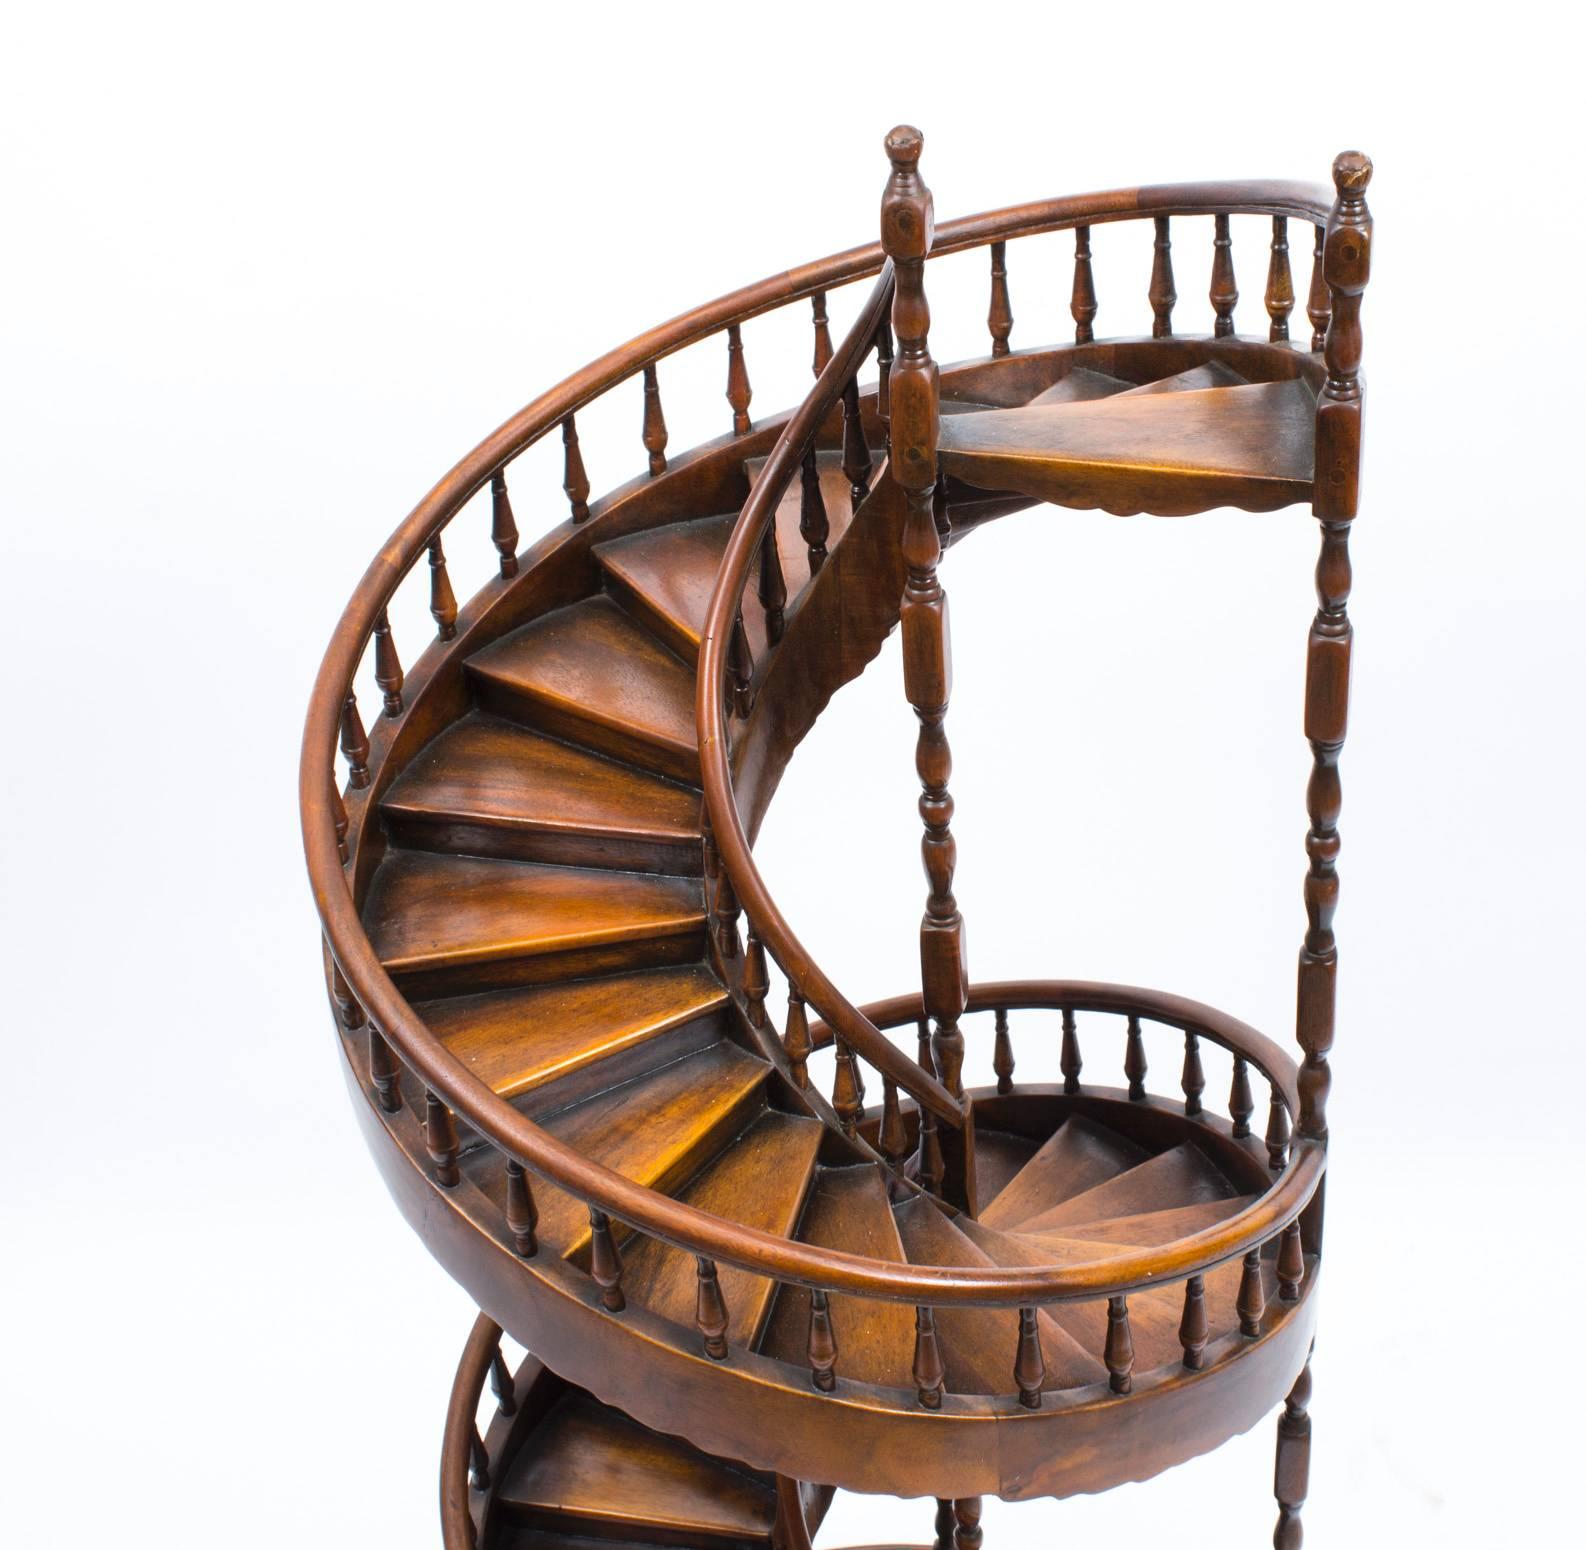 This is a superb quality mahogany apprentice's spiral staircase of early 19th century design, with a double spiral composed of thirty-two steps with turned balusters on a circular plinth base dating from the second half of the 20th century.

Ideal